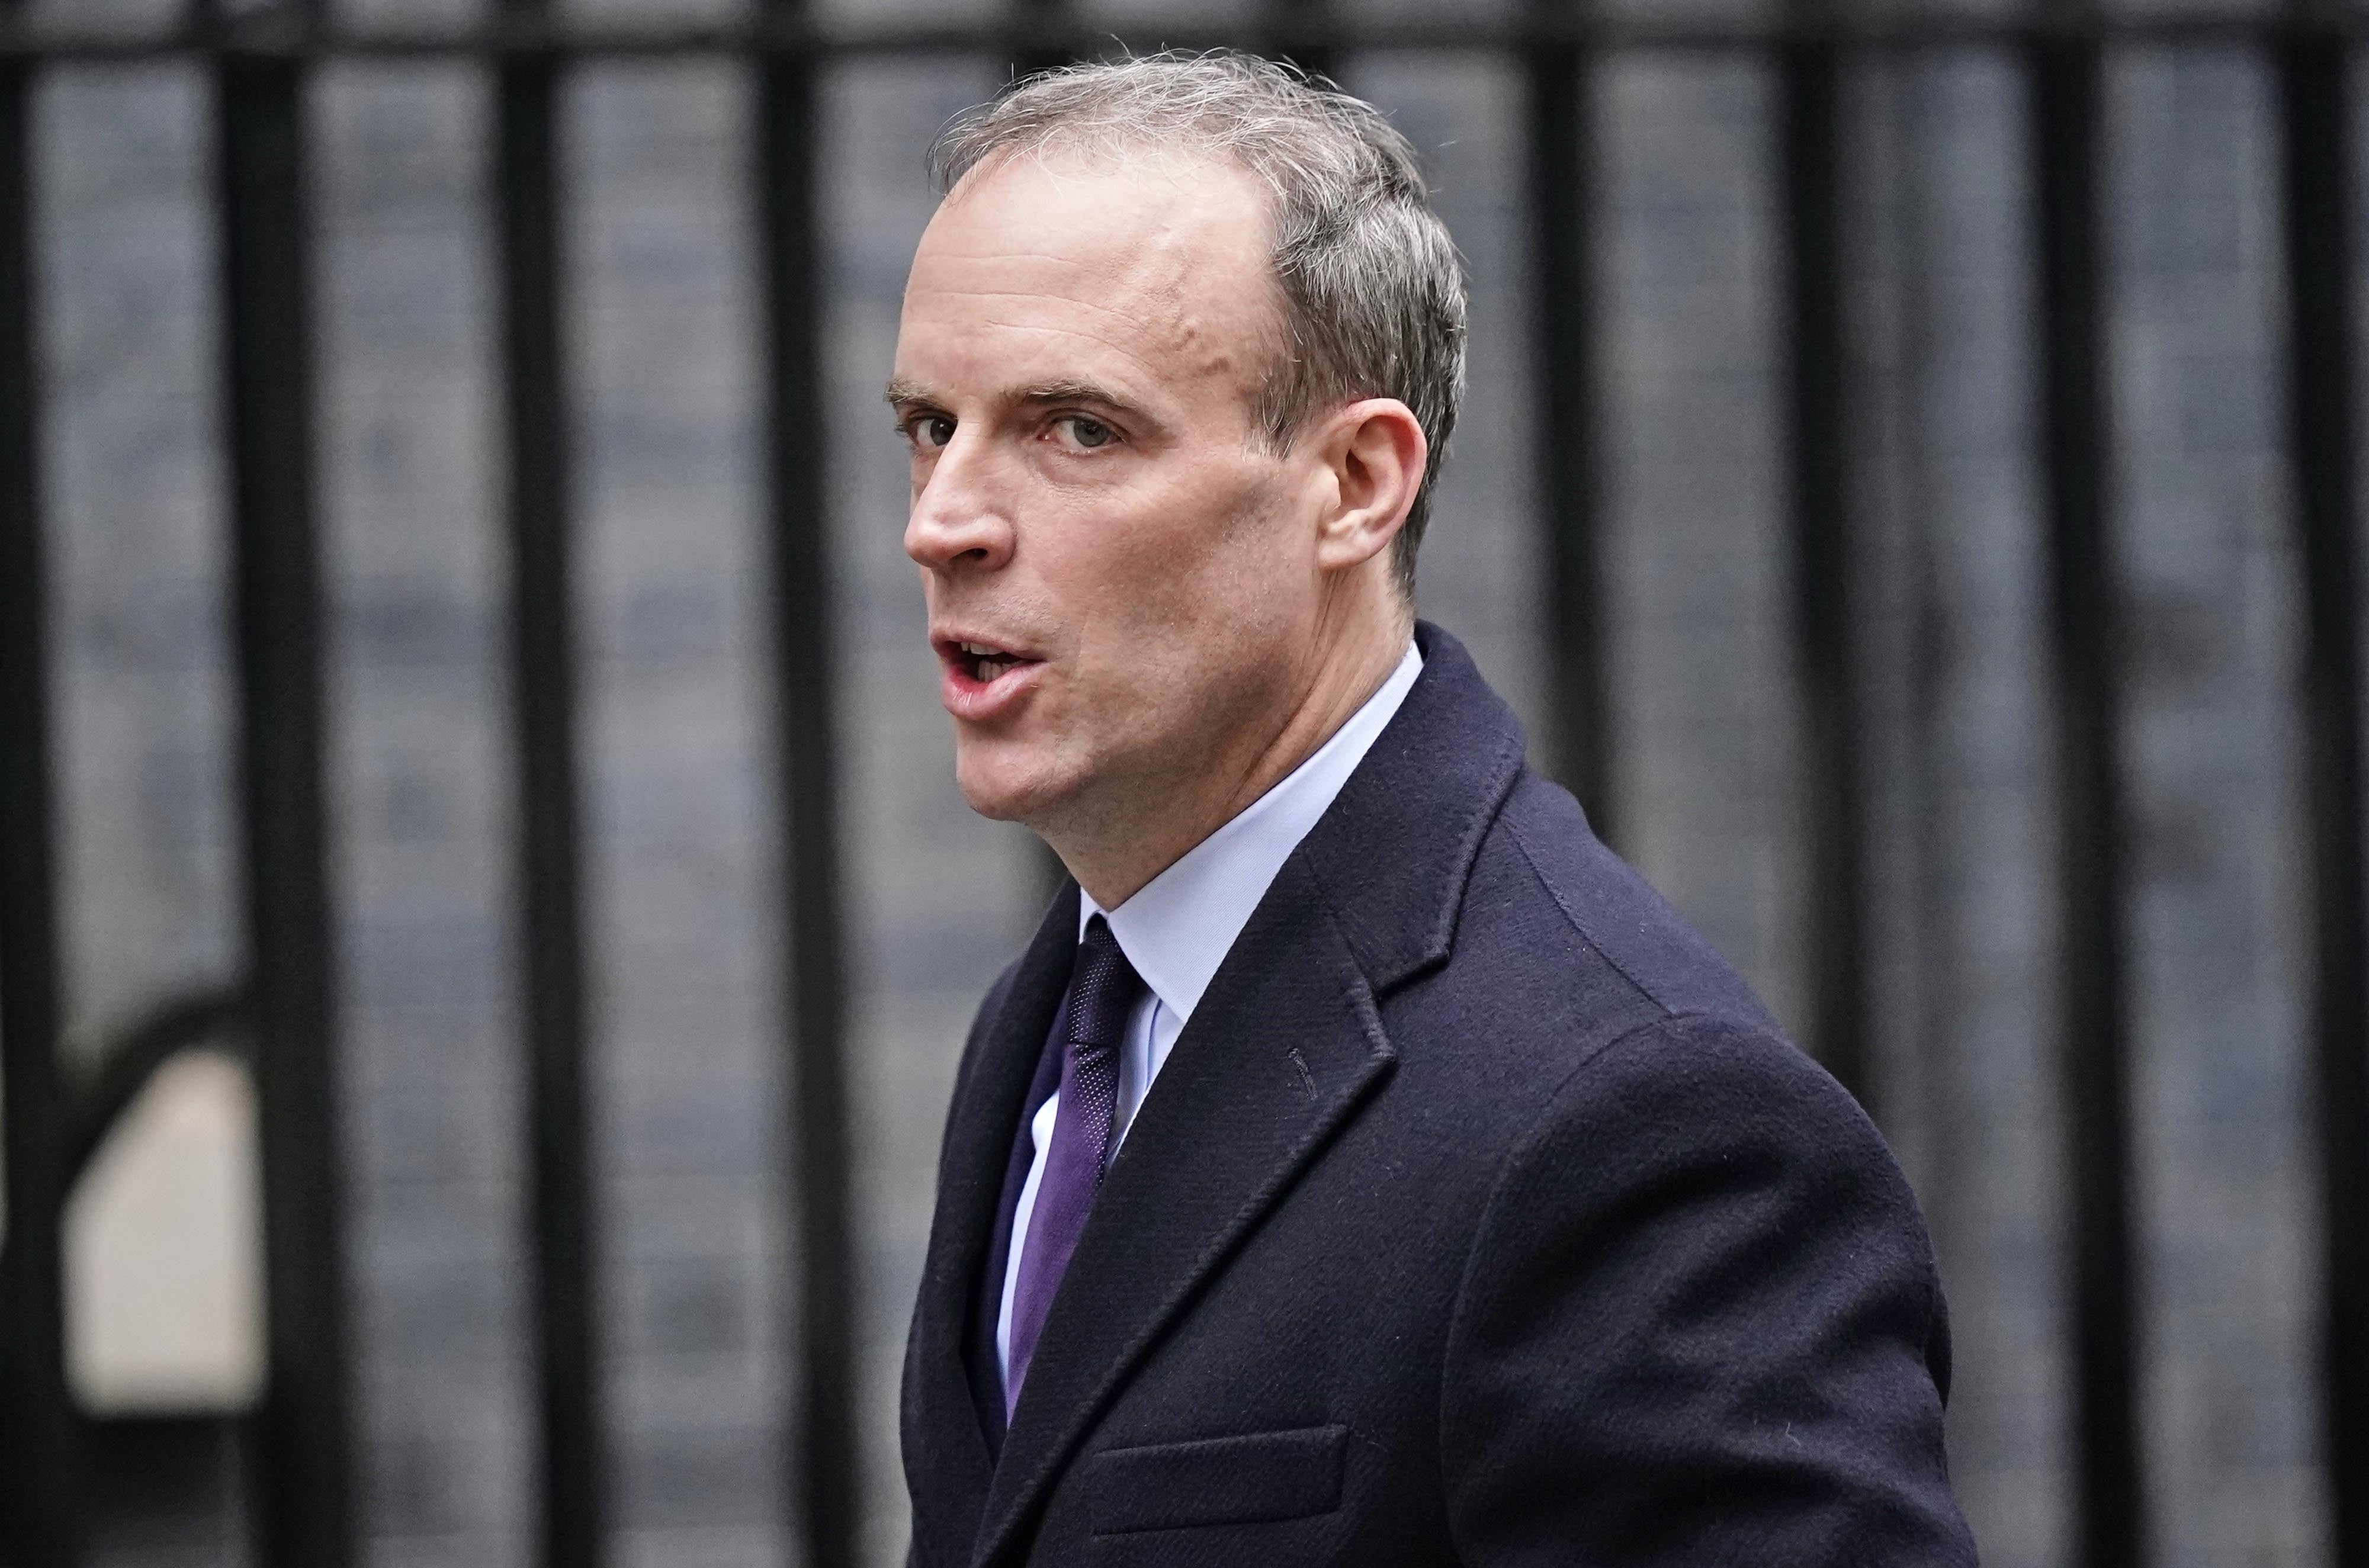 Dominic Raab’s proposals go far beyond an official review commissioned by his own government